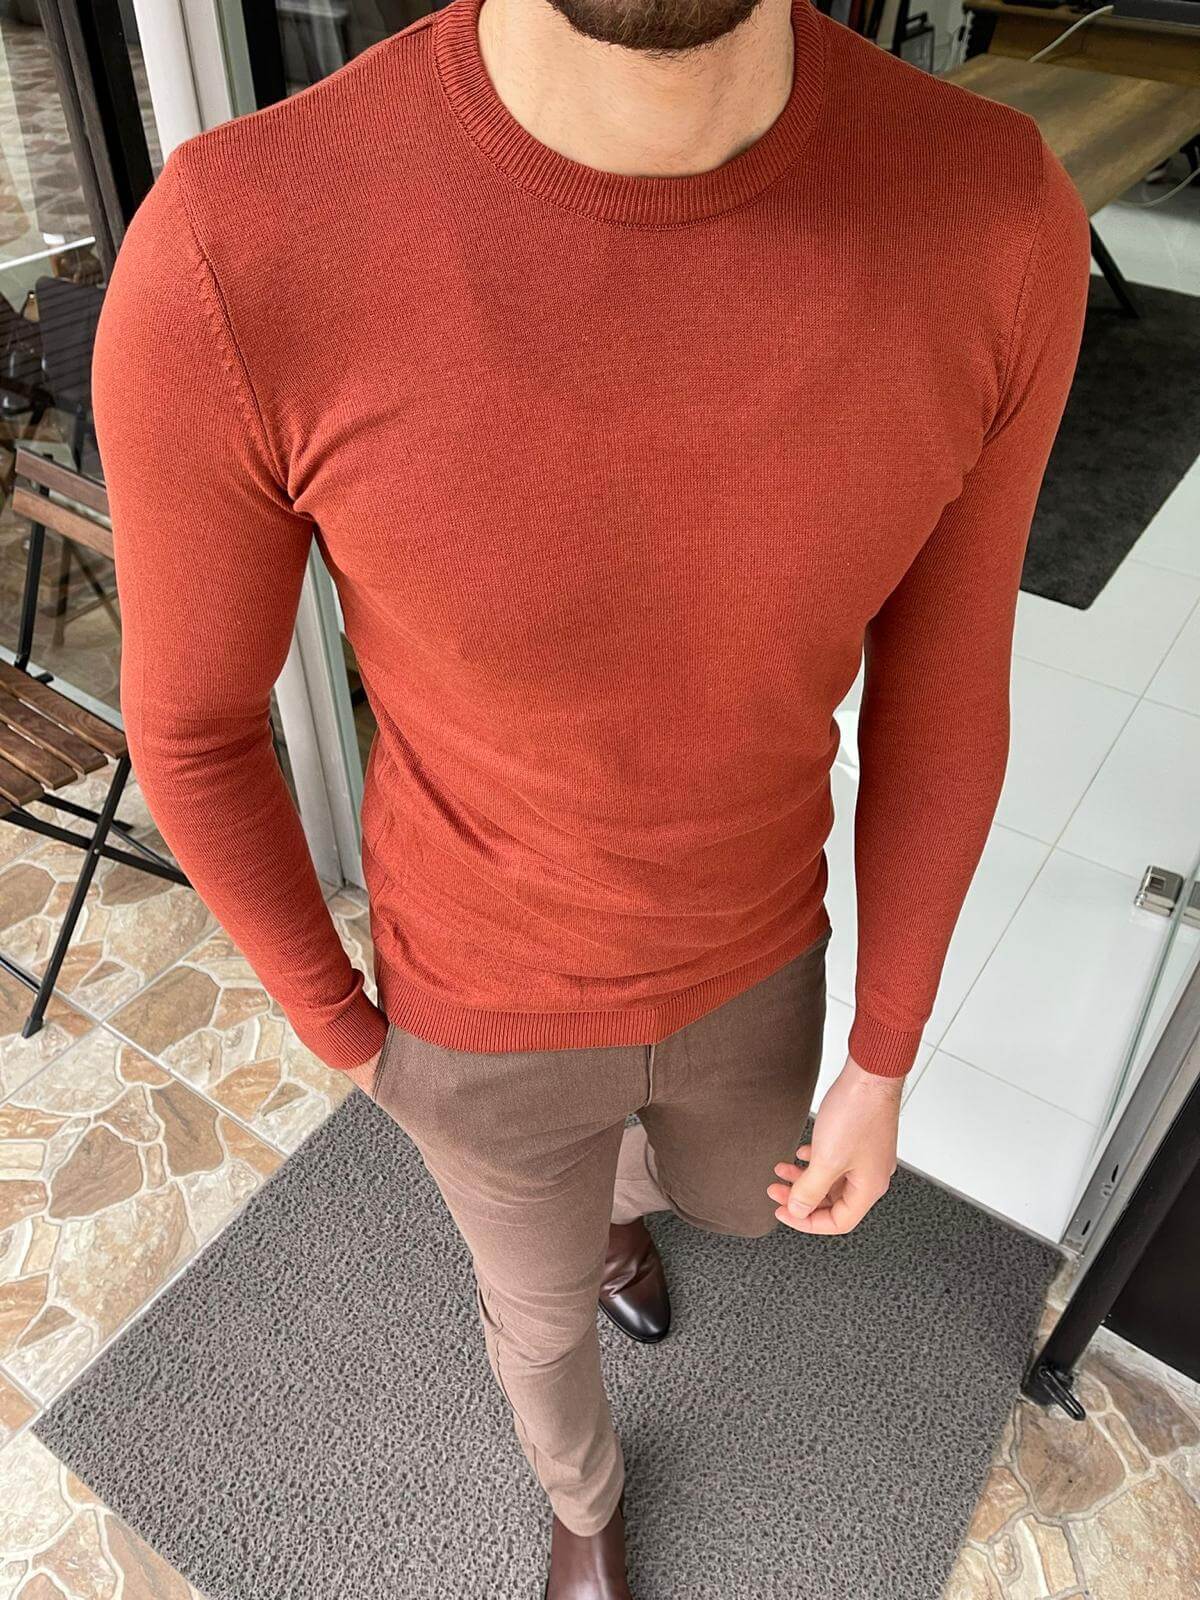 A cozy crewneck sweater in a textured tile pattern, featuring a blend of warm colors and a soft knit fabric."